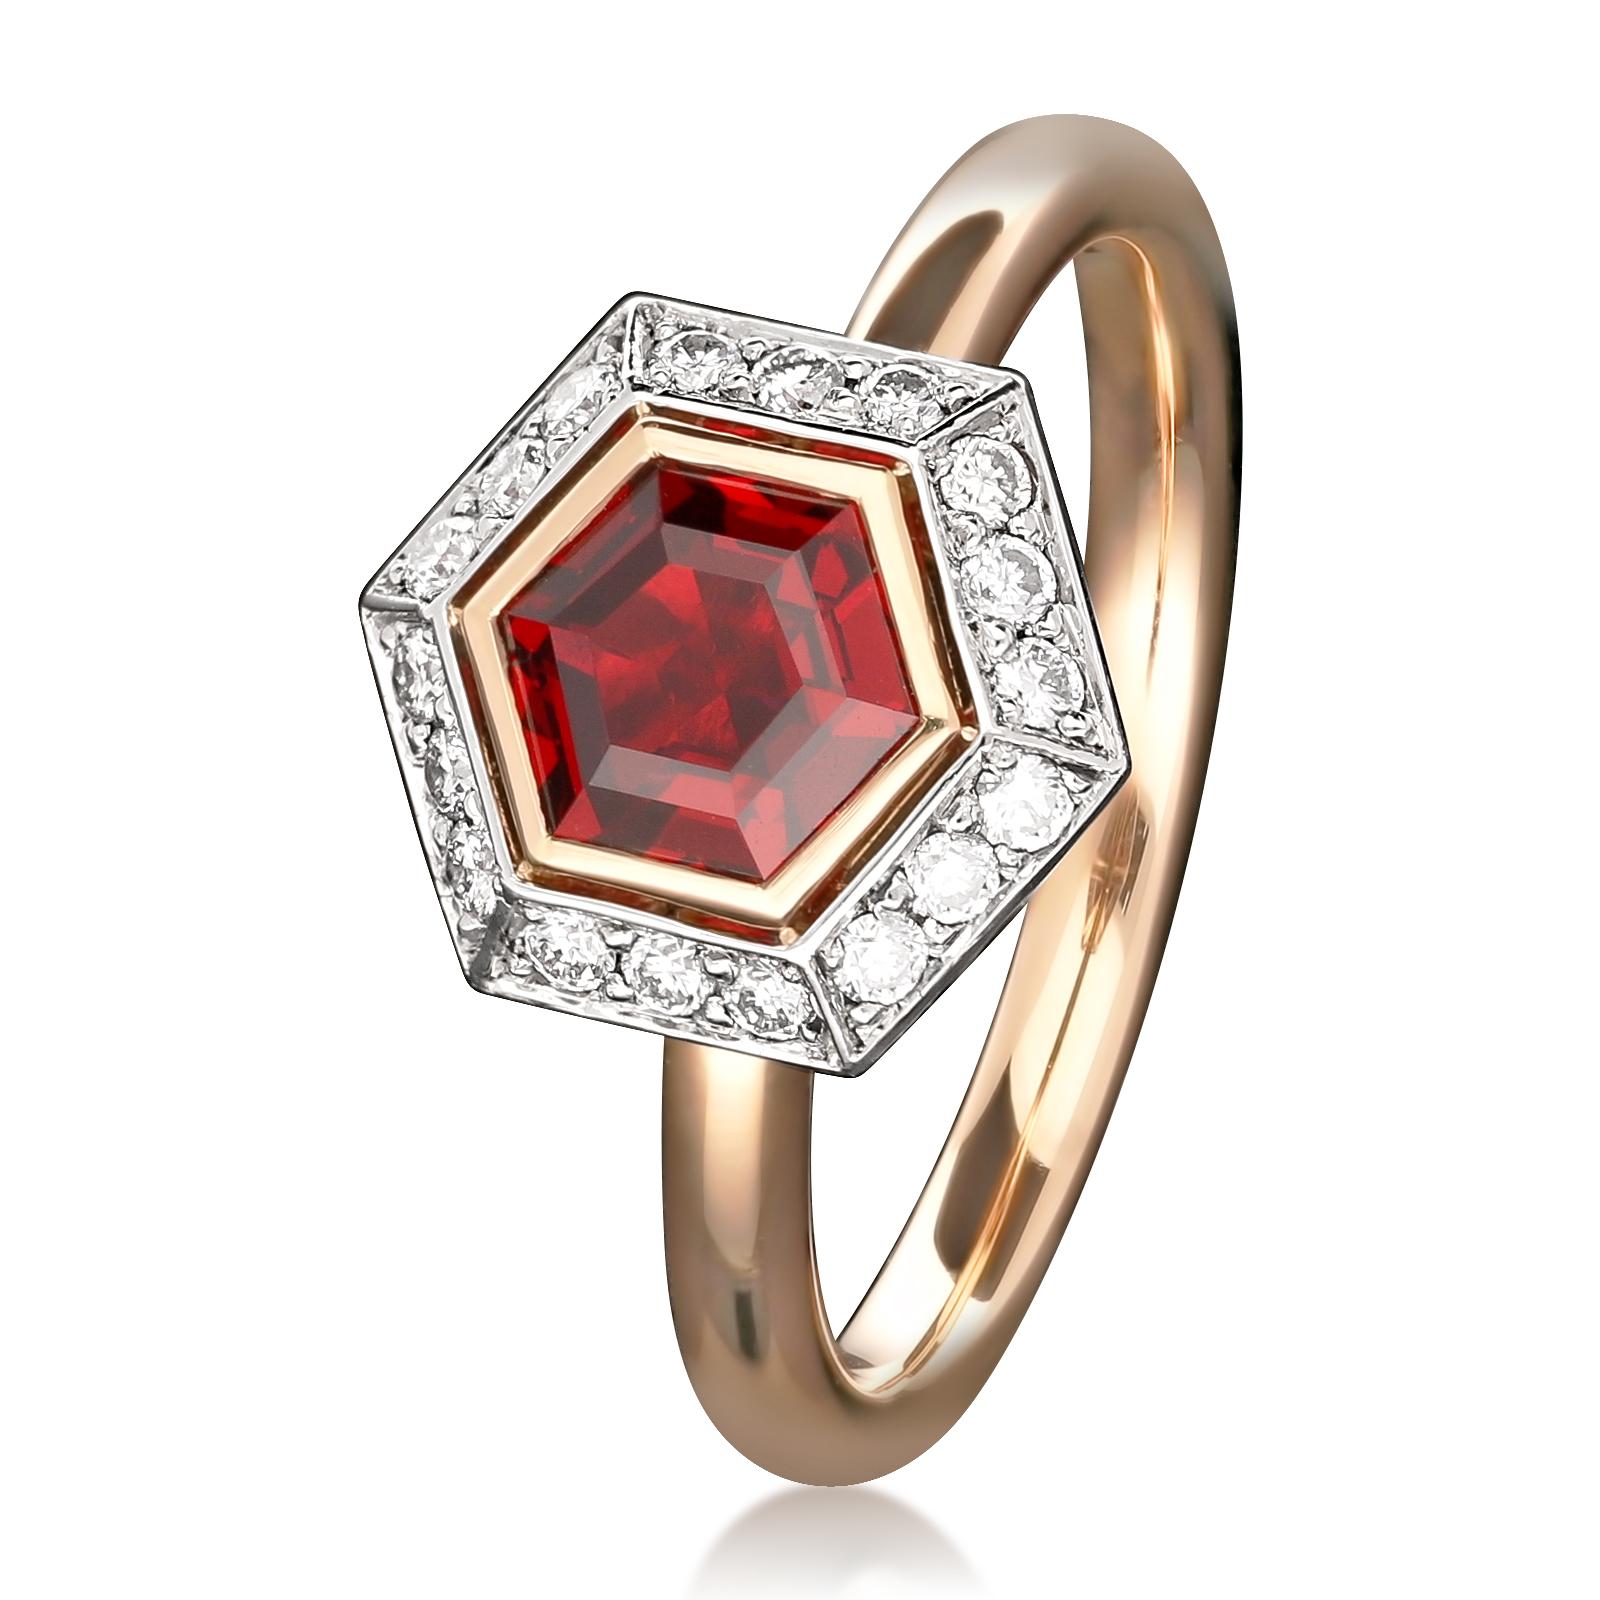 A beautiful red spinel and diamond ring by Hancocks, centred with a wonderfully rich vivid red hexagonal step-cut Burmese spinel weighing 0.92ct and certified unheated, in a geometric rub over rose gold setting surrounded by a separated frame of